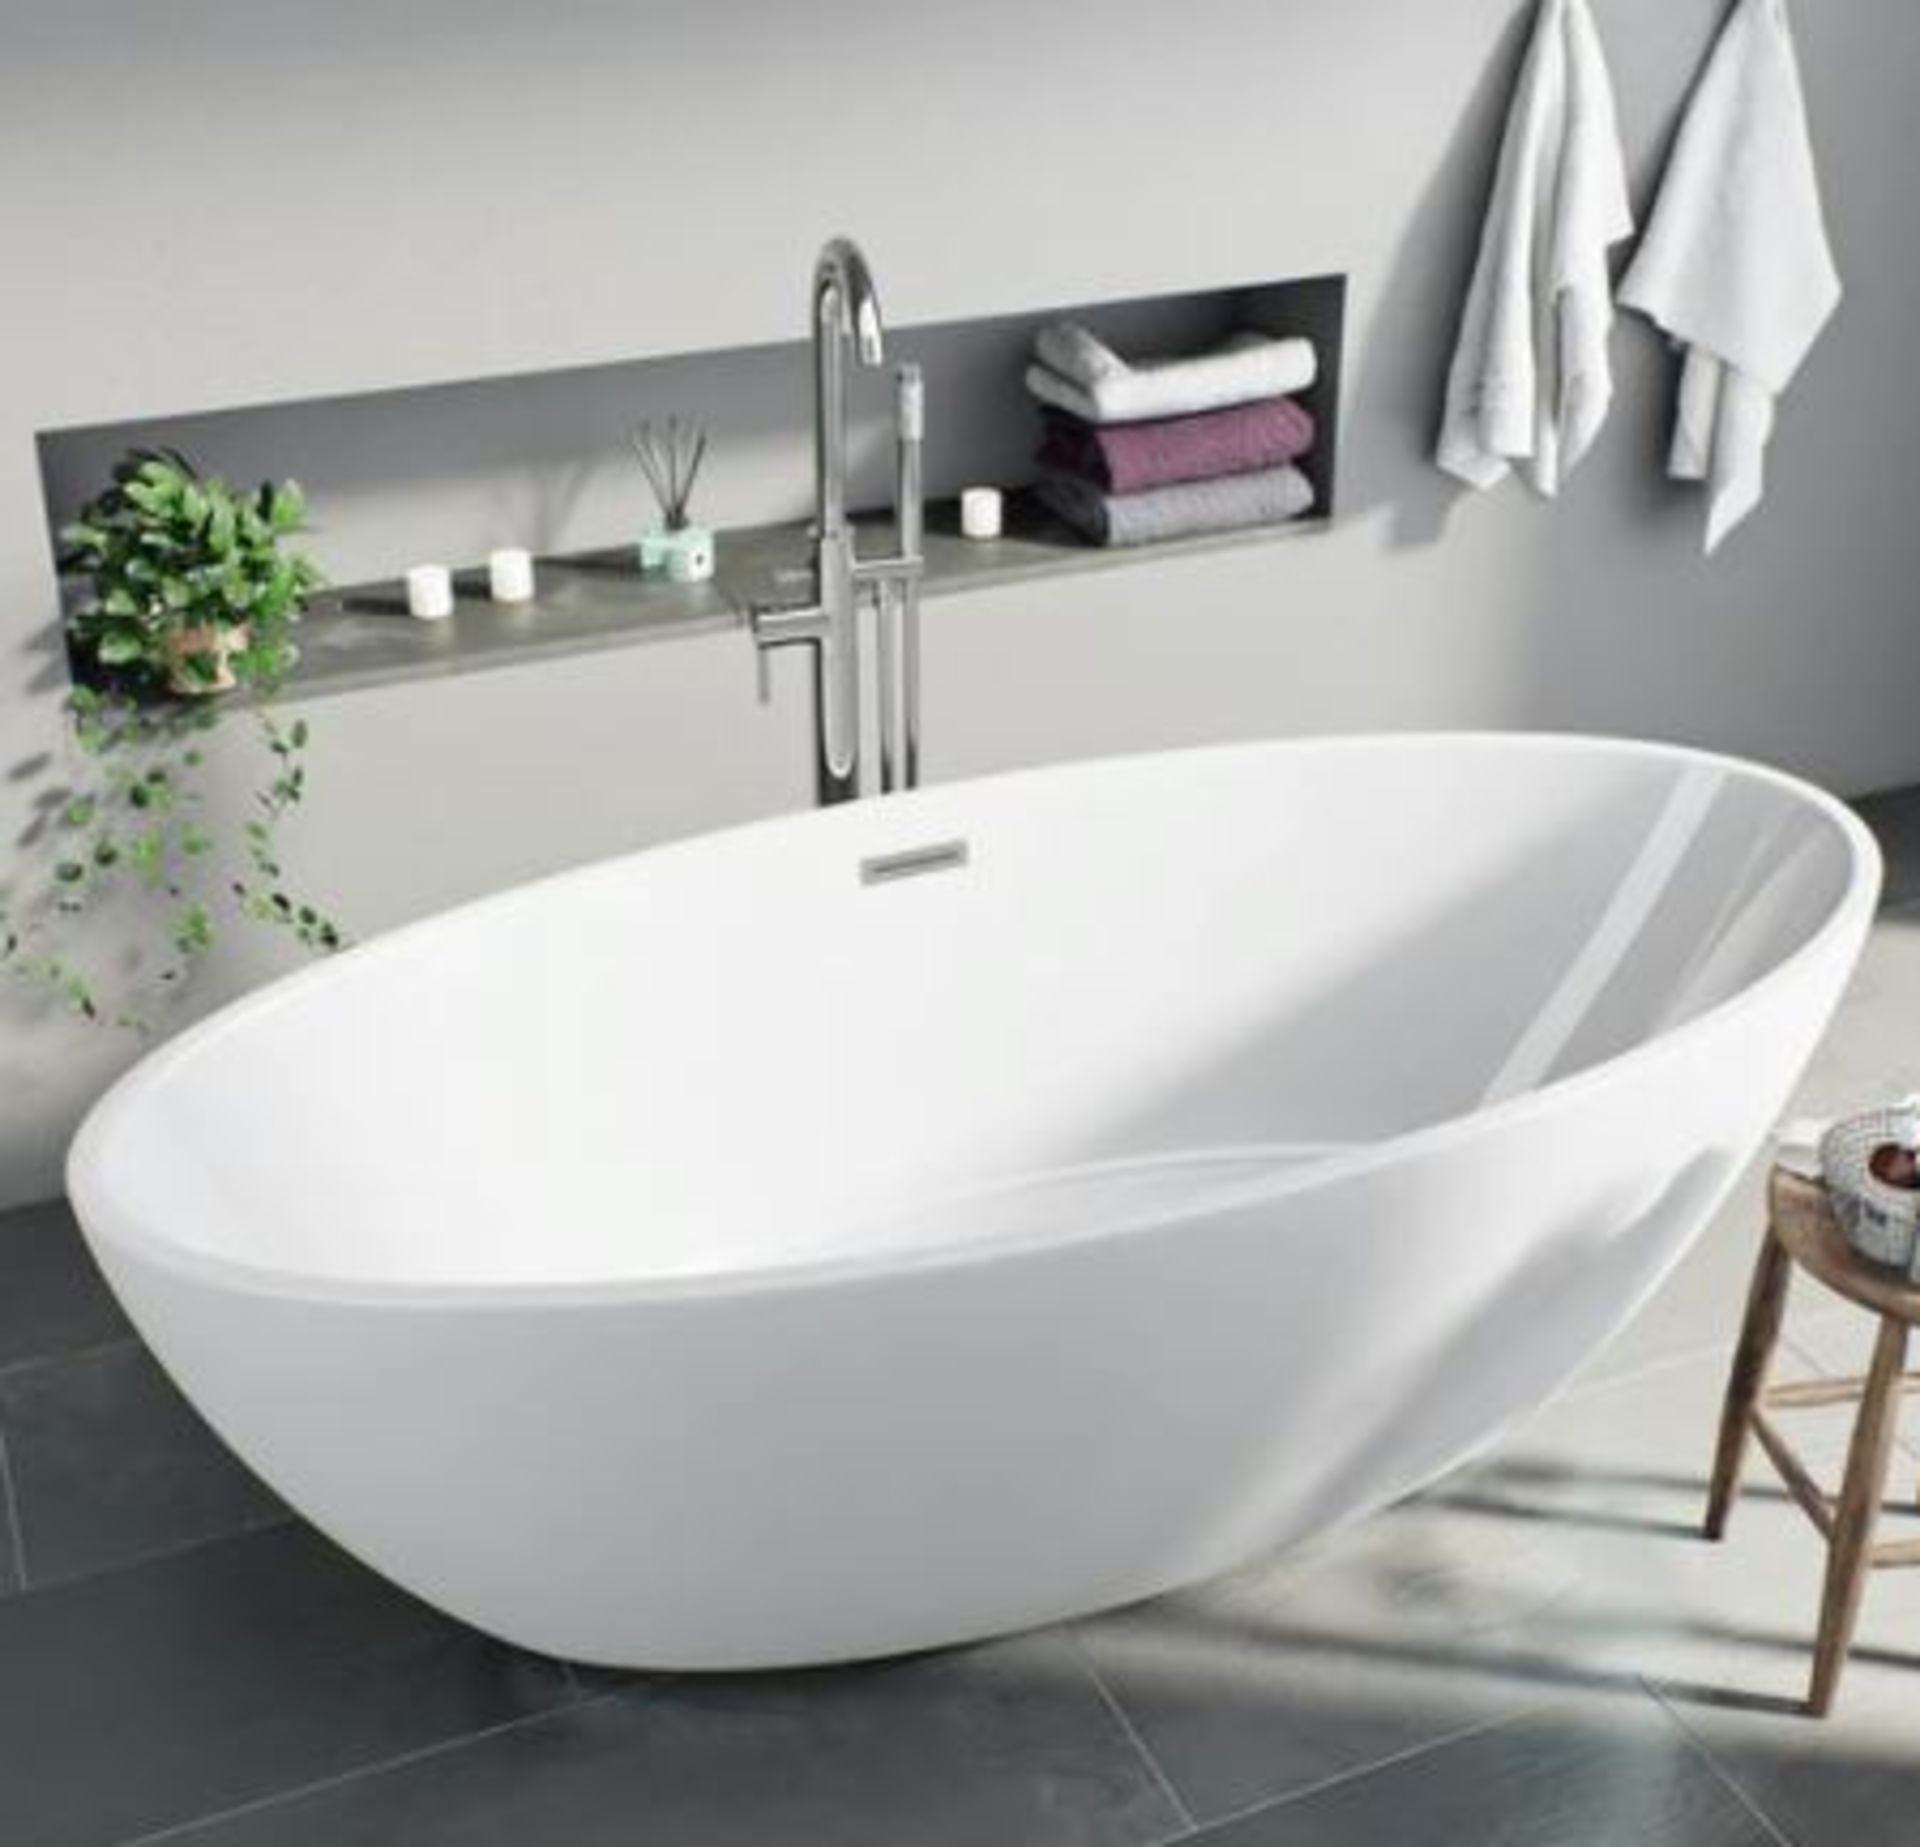 1 X Harrison Freestanding Bath With Waste Mode H600 X W810 X L1790 (rbaif2001) RRP £800 - Image 3 of 7